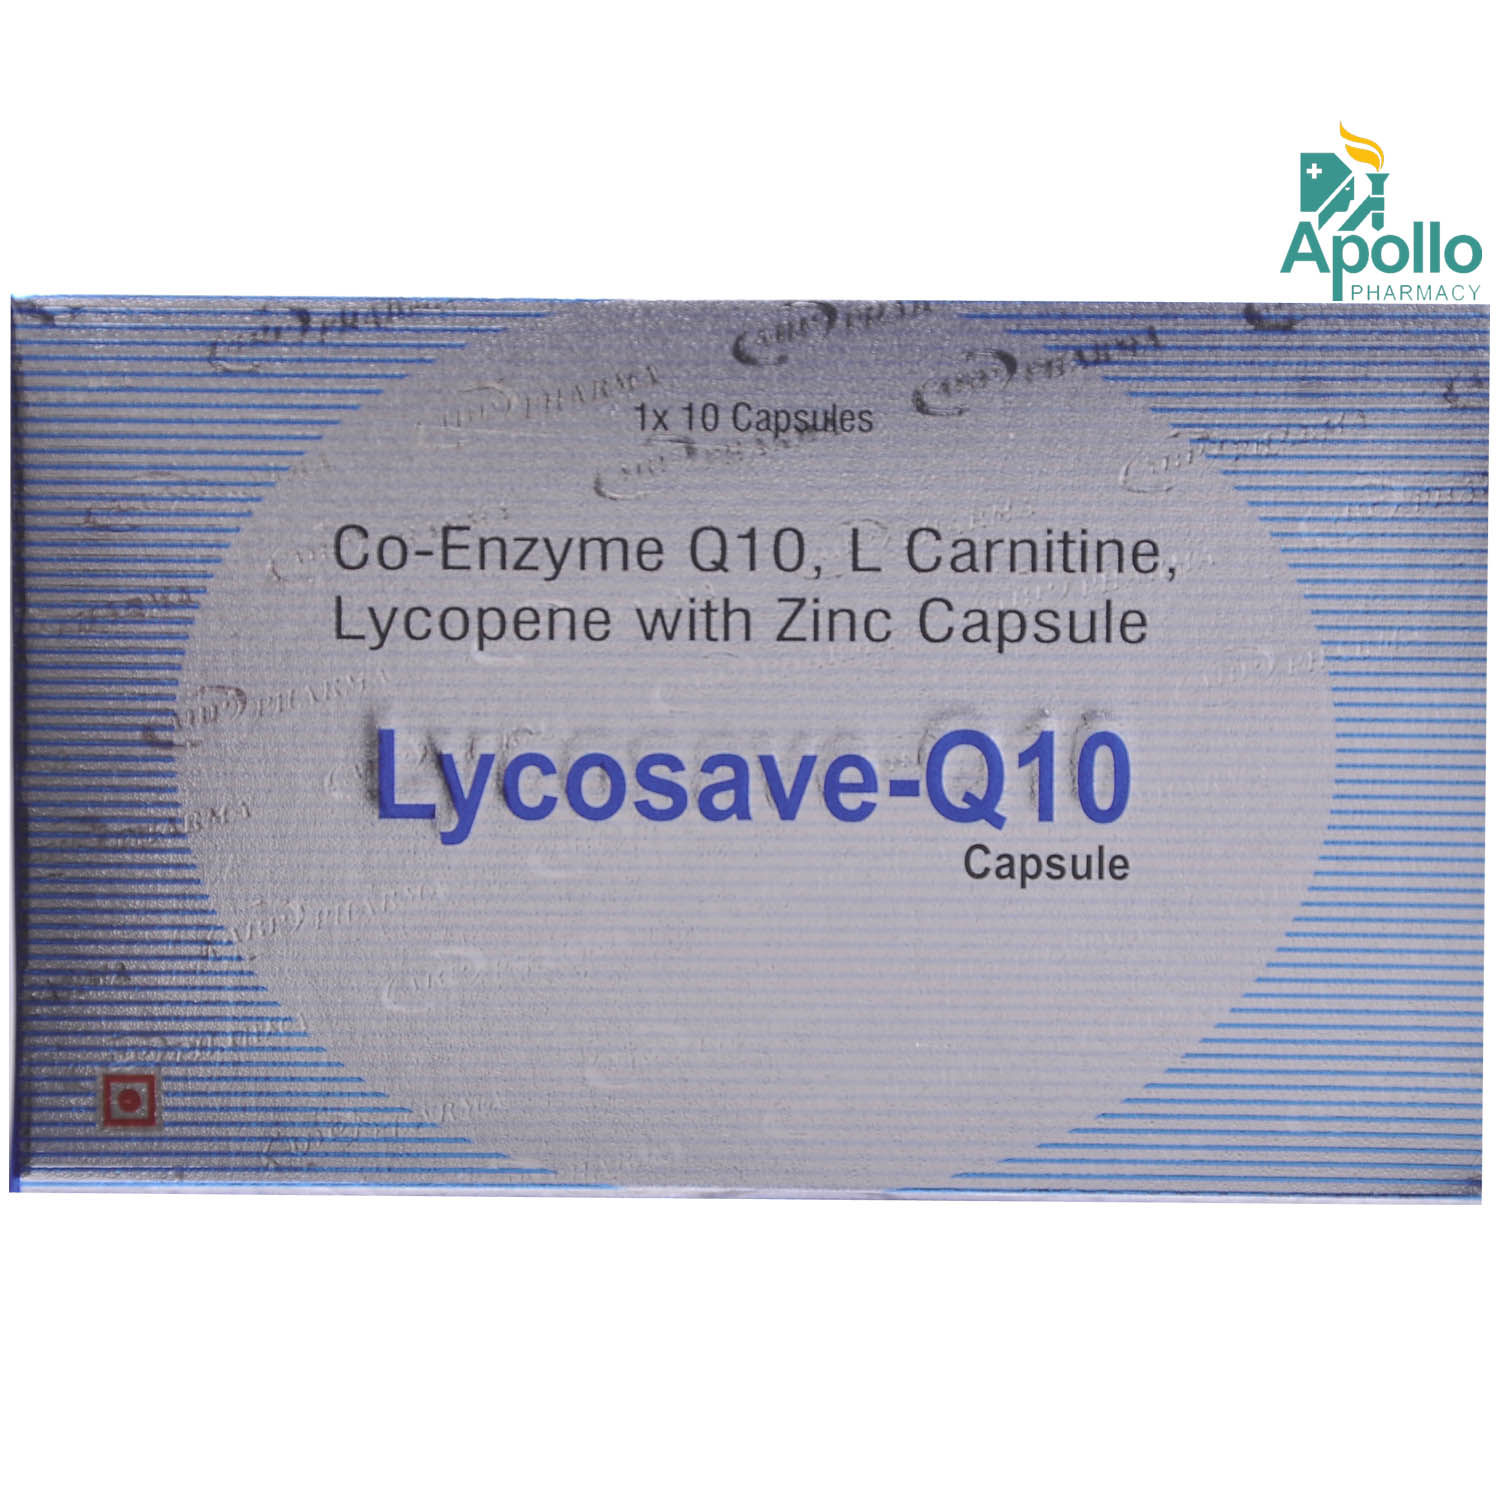 Lycosave-Q10 Capsule 10's, Pack of 10 S